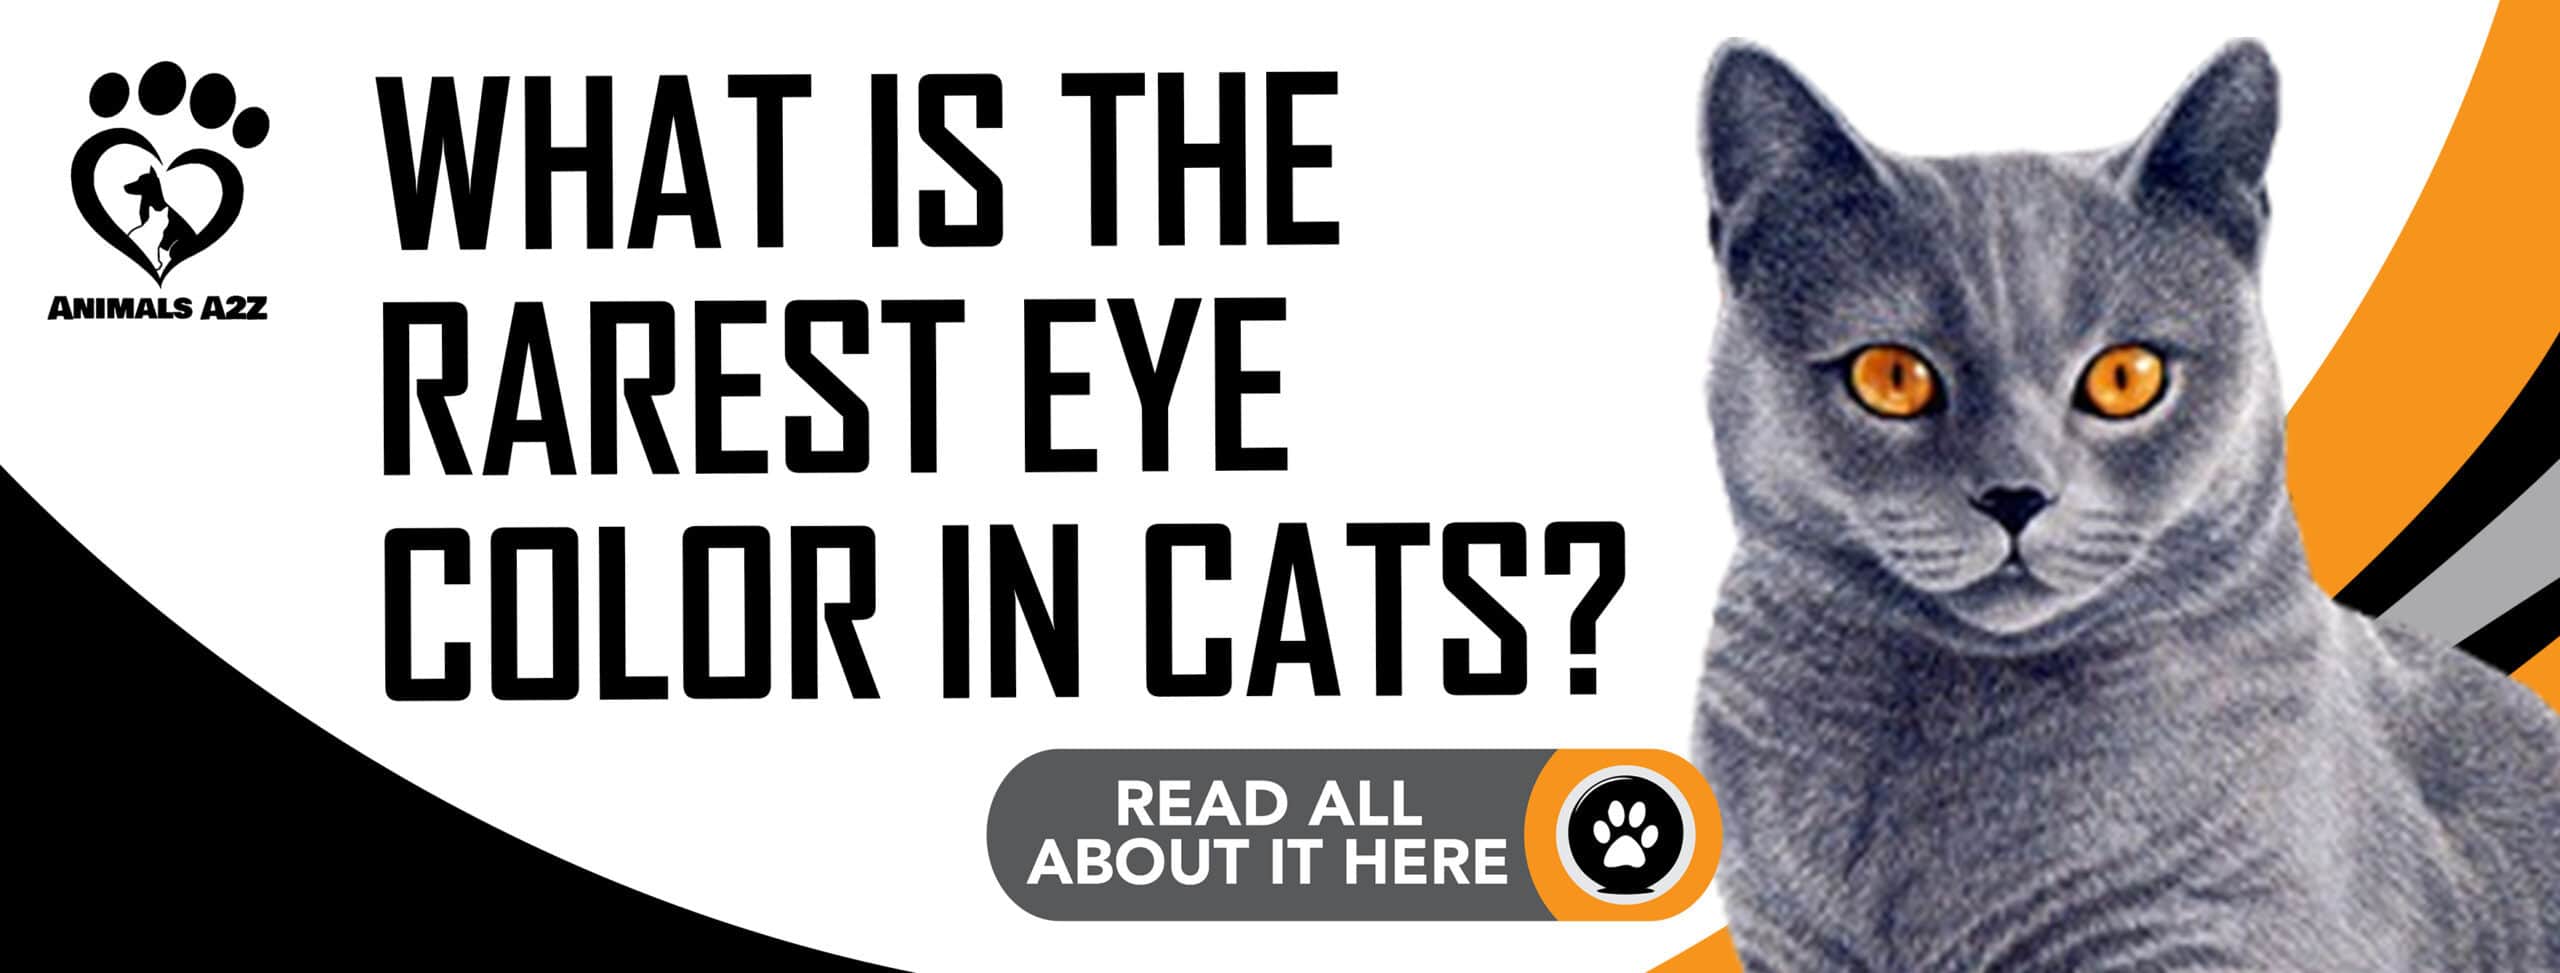 What is the rarest eye color in cats